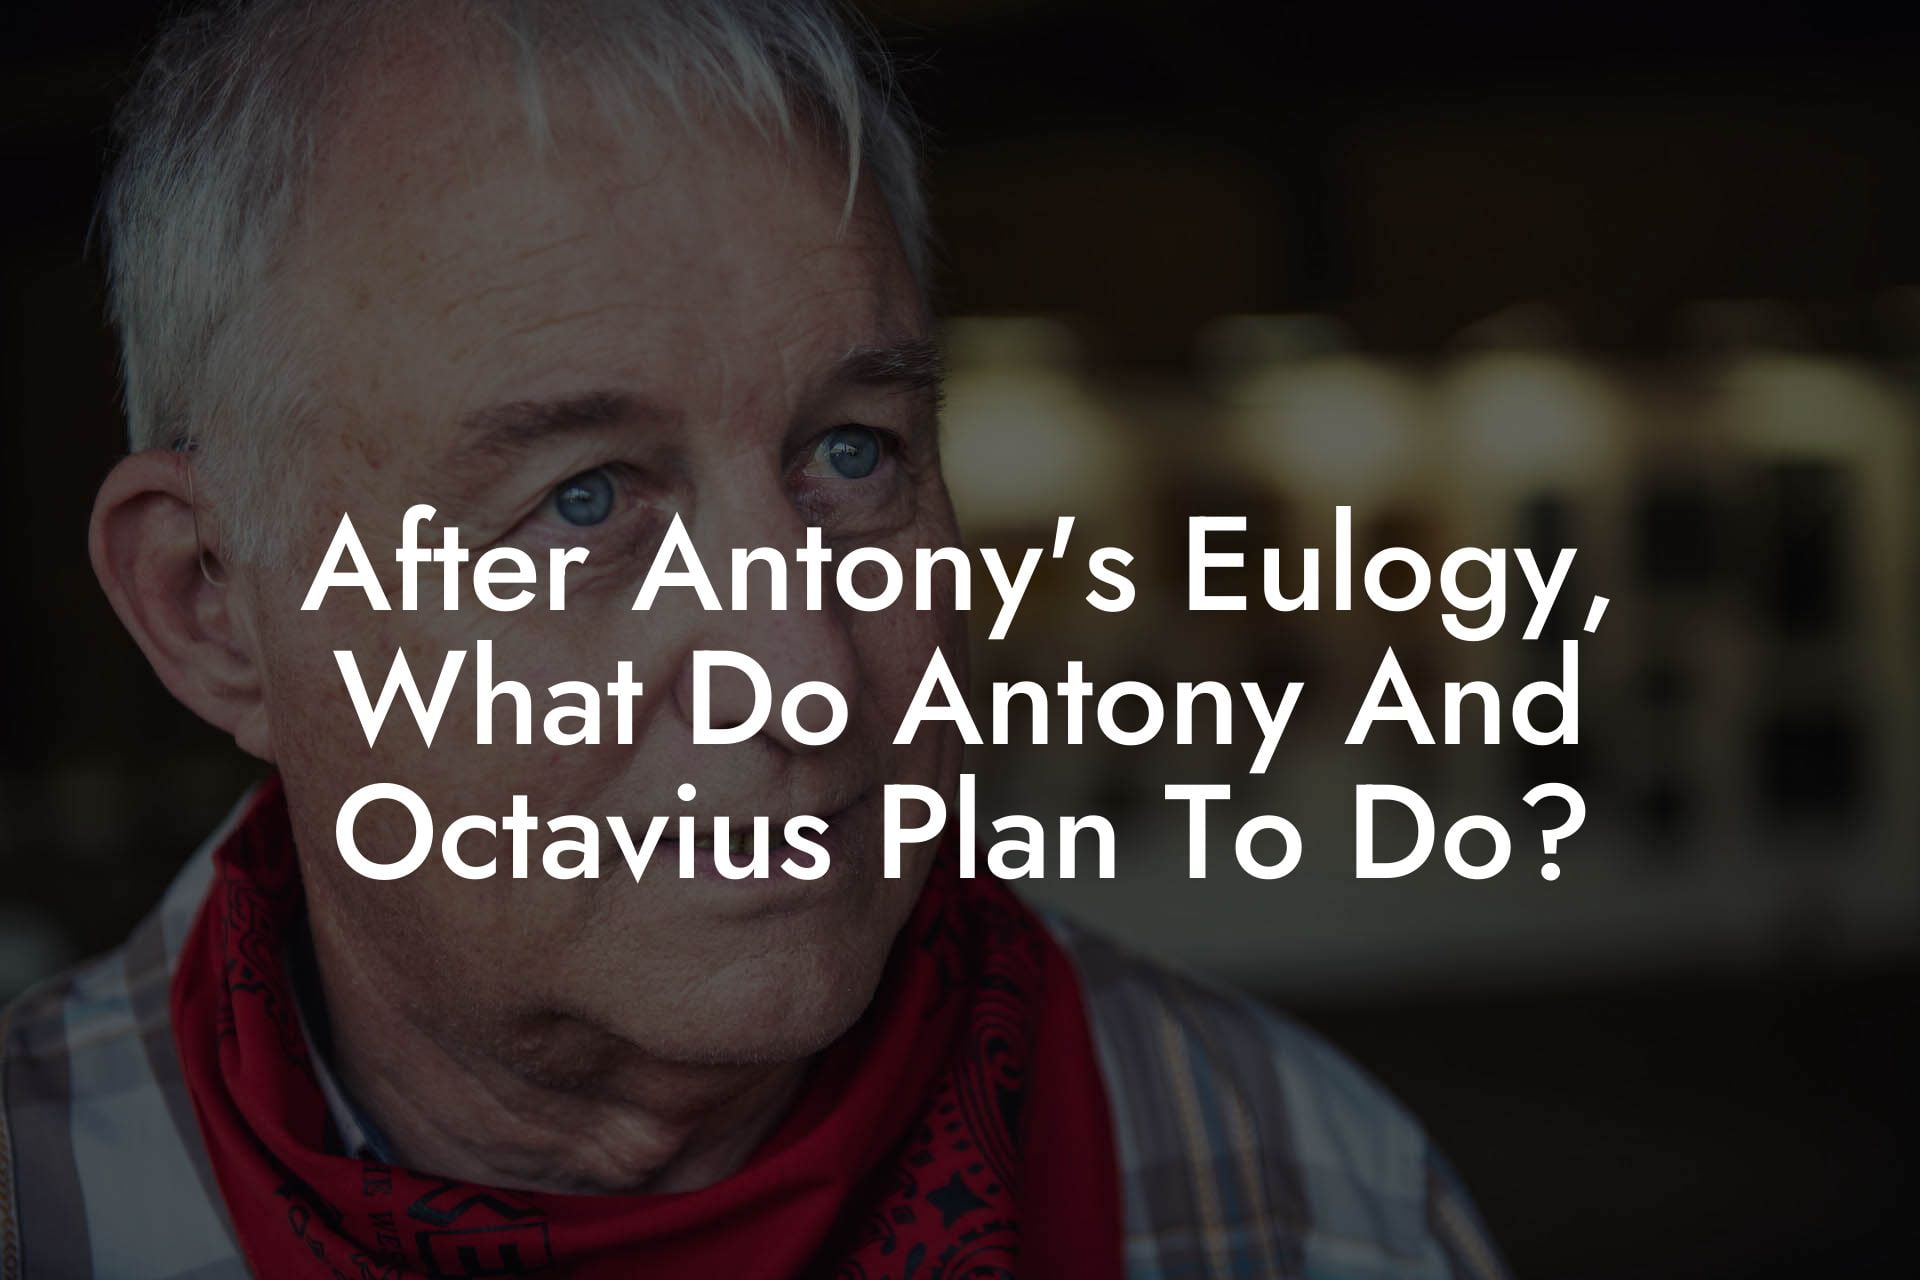 After Antony's Eulogy, What Do Antony And Octavius Plan To Do?